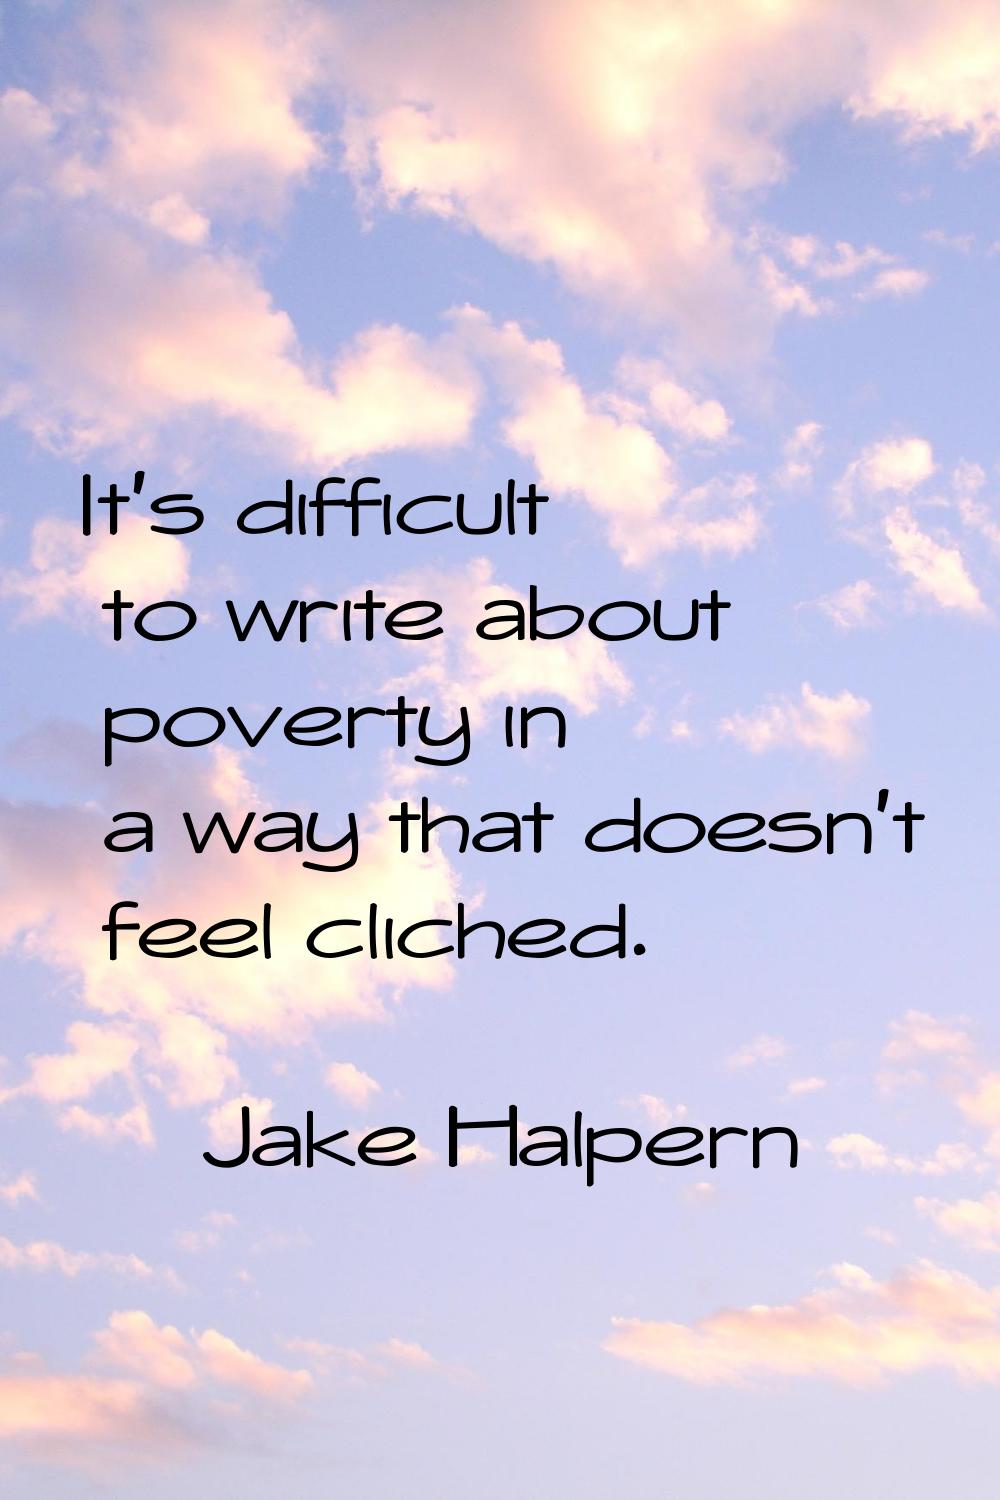 It's difficult to write about poverty in a way that doesn't feel cliched.